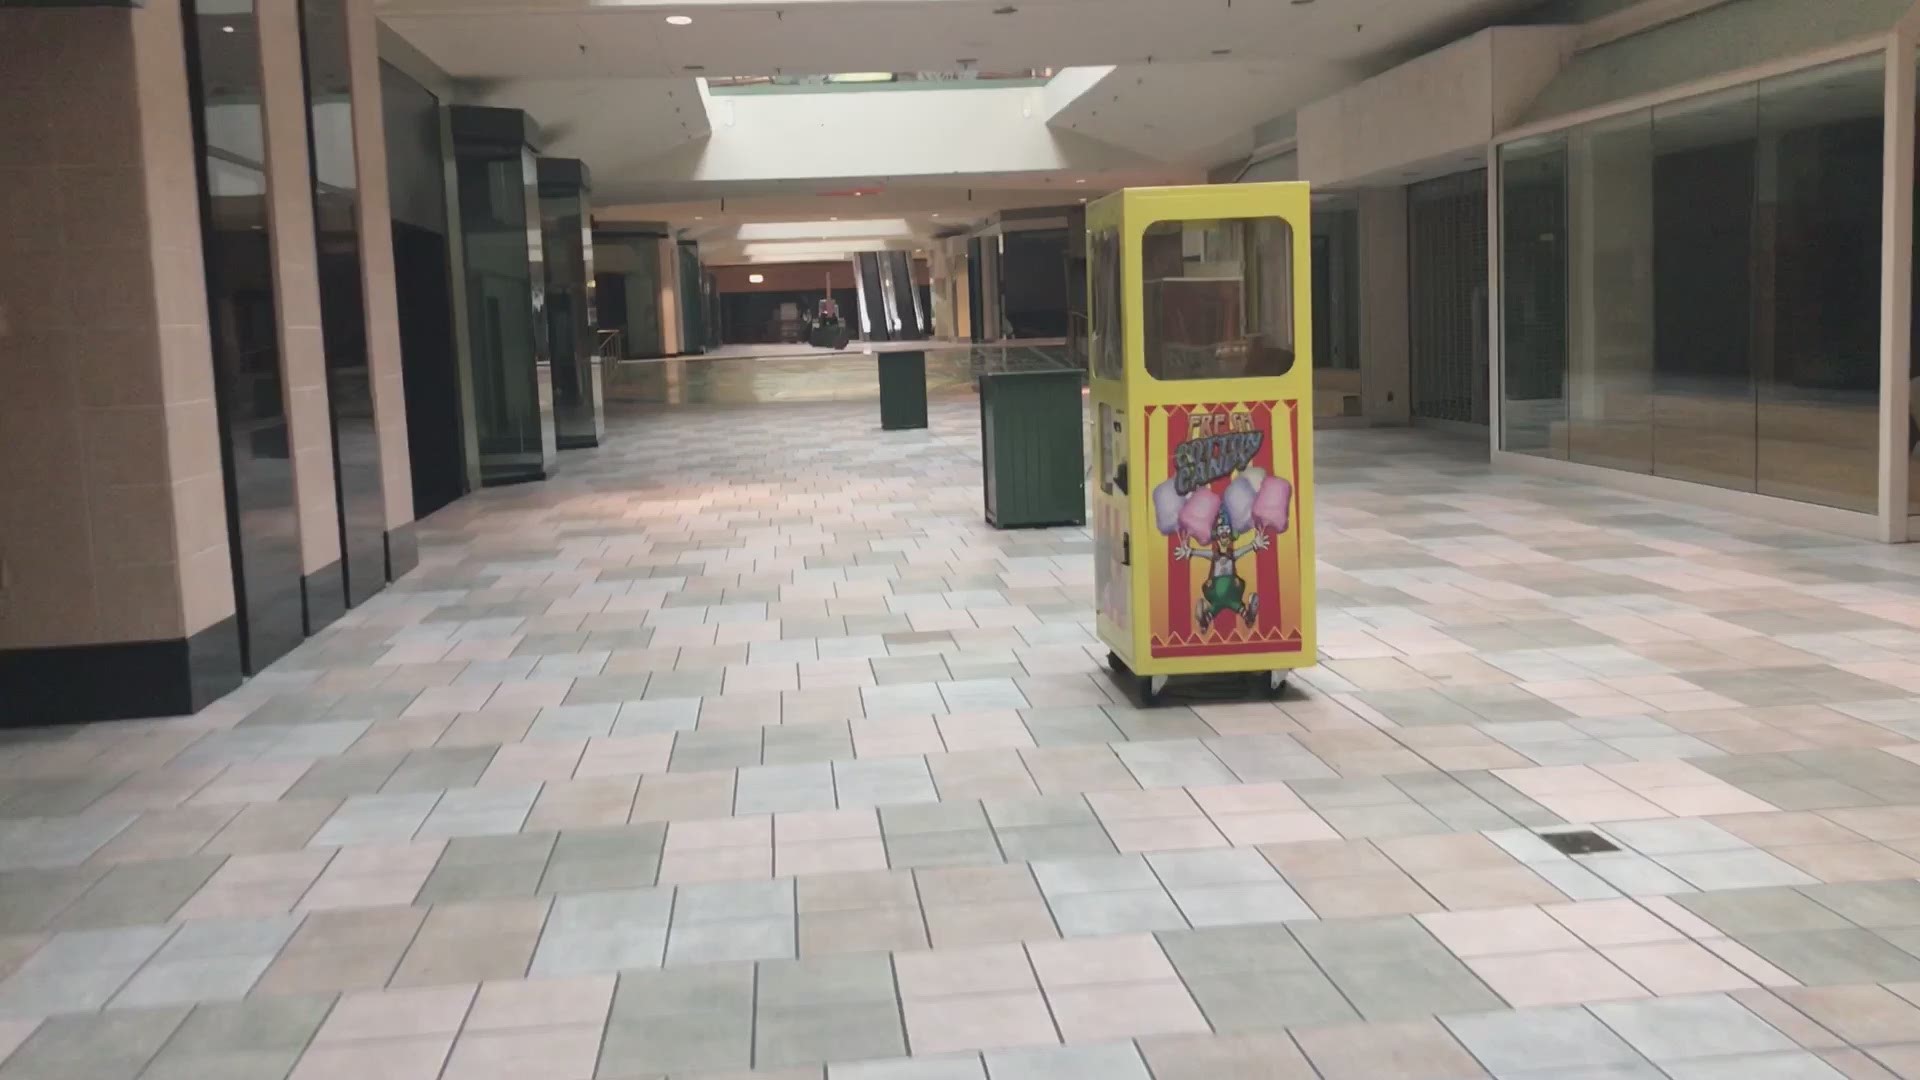 Knoxville Center Mall will be closing on Jan. 31, 2020 after over three decades in Northeast Knoxville.